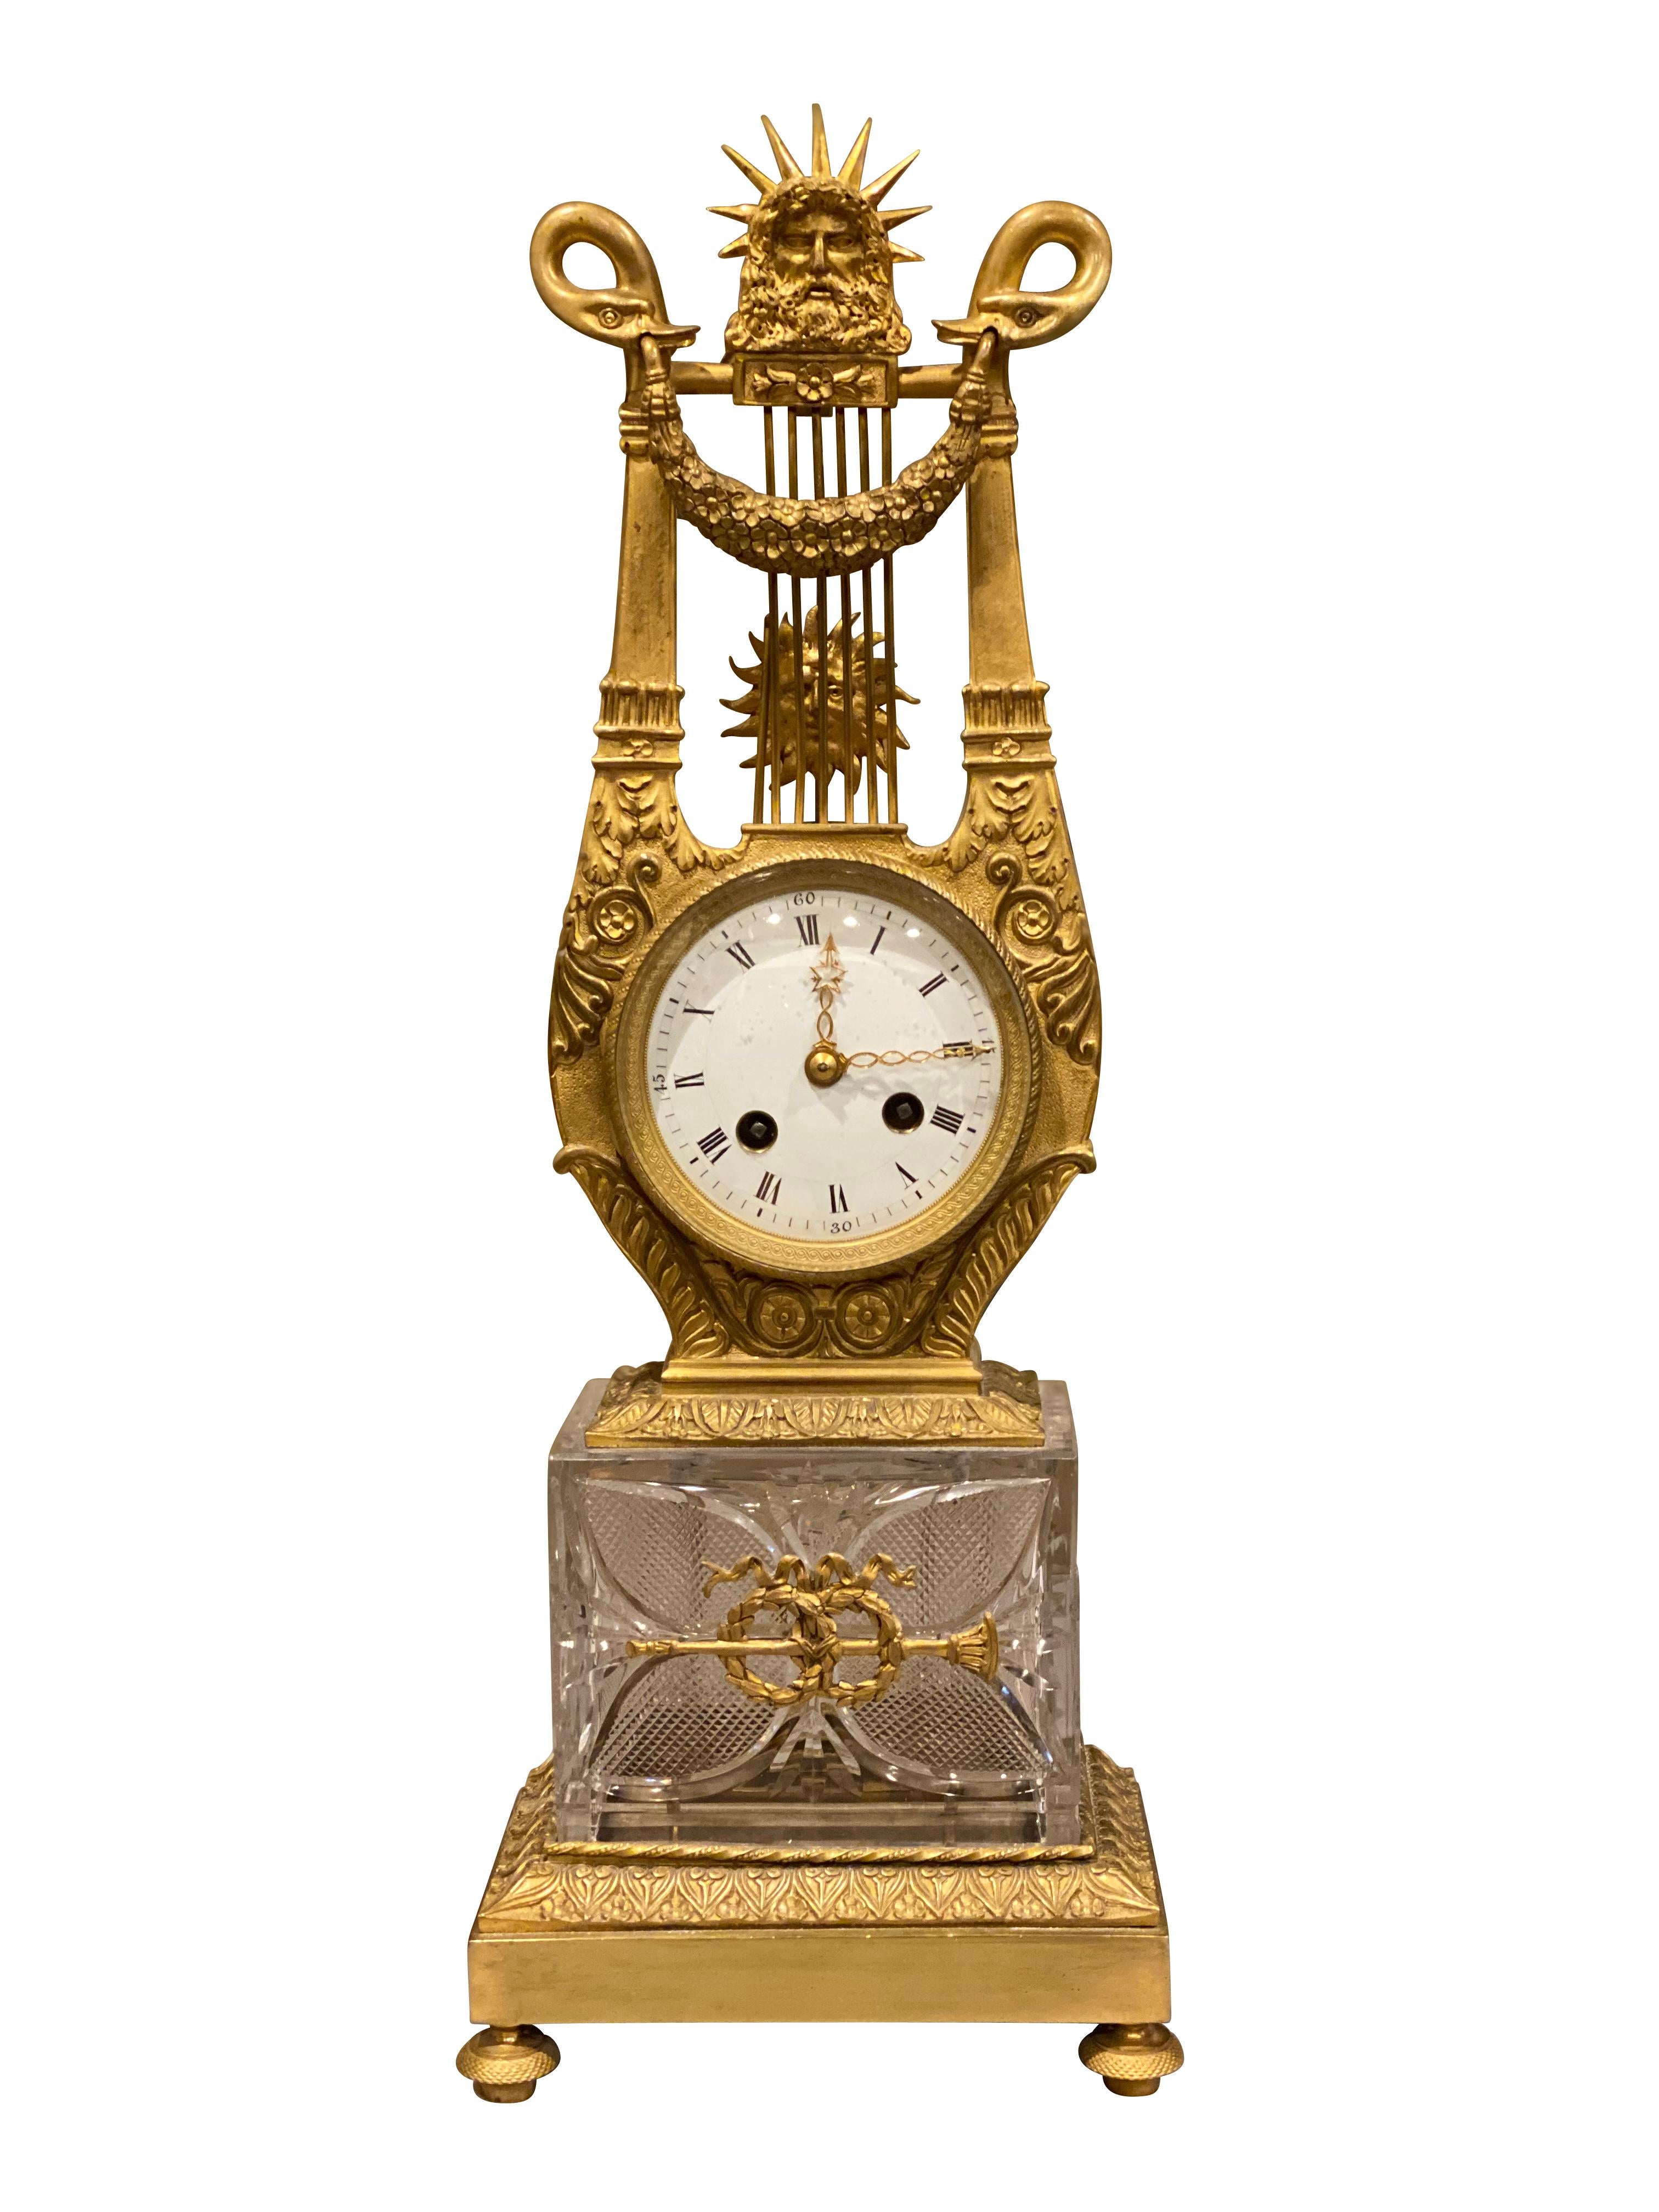 With sun god atop a lyre form case the lower part holding an enameled dial face above a cut glass and bronze base.